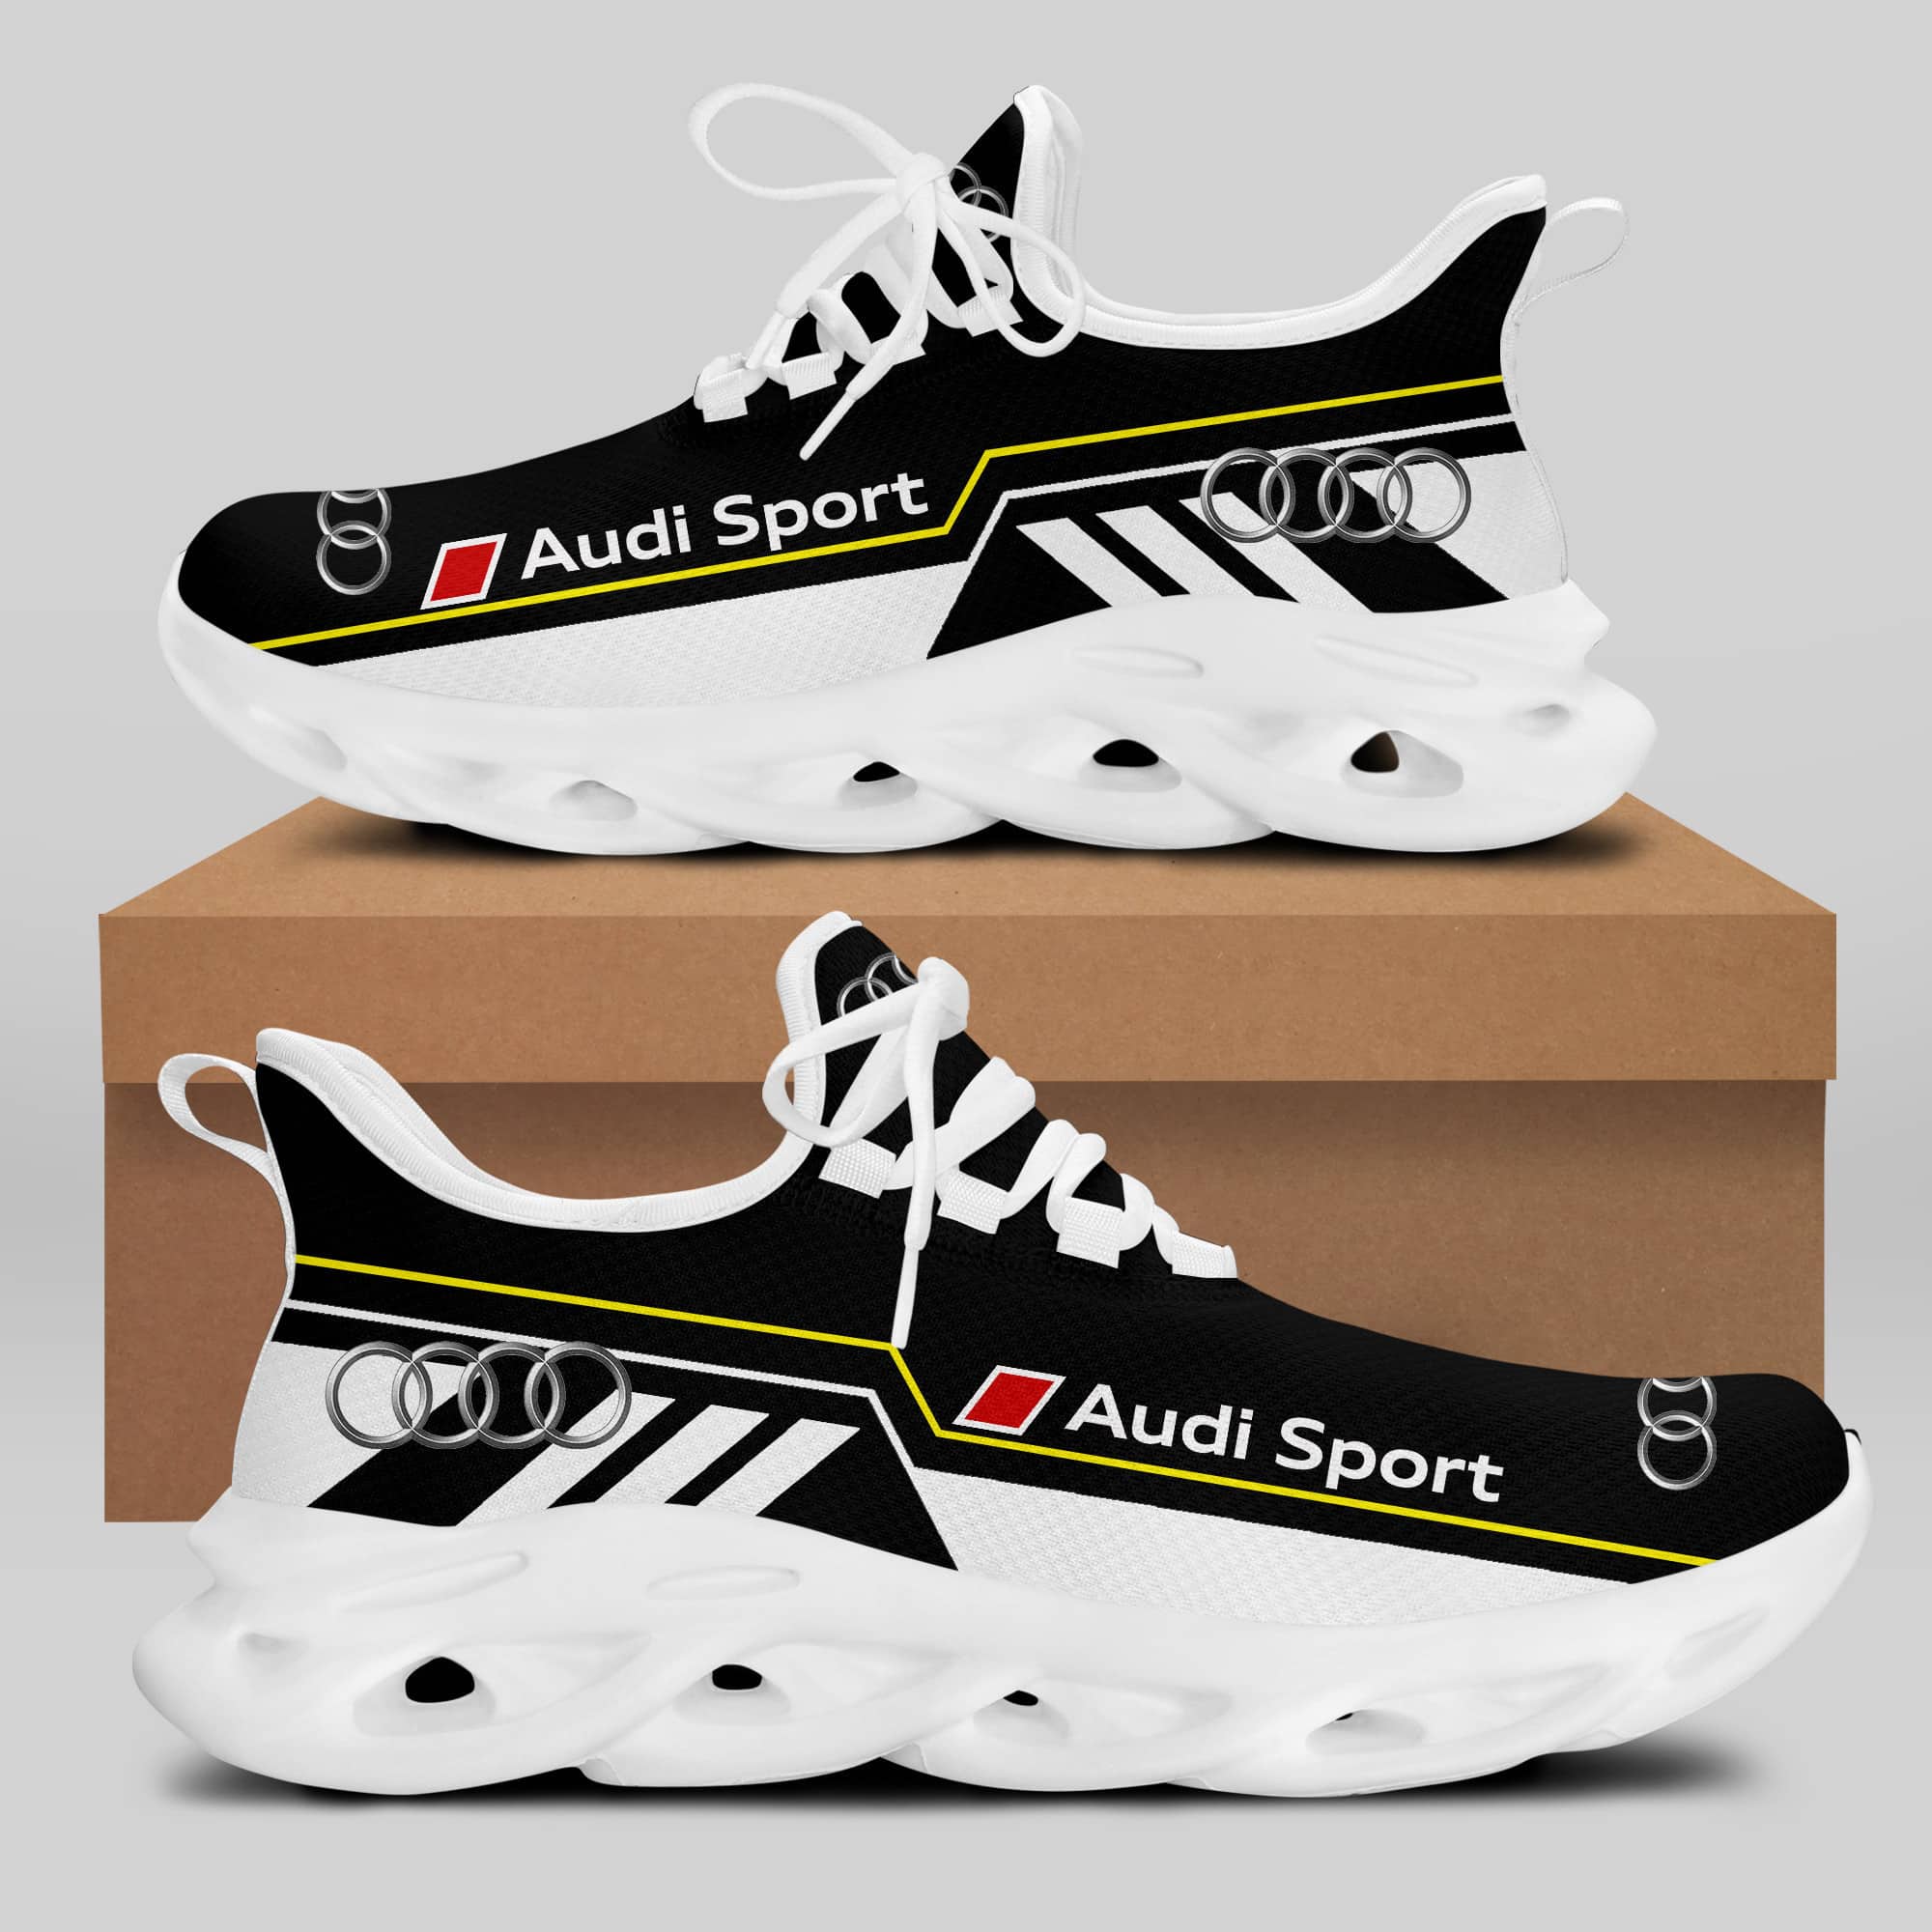 Audi Sport Running Shoes Max Soul Shoes Sneakers Ver 37 2